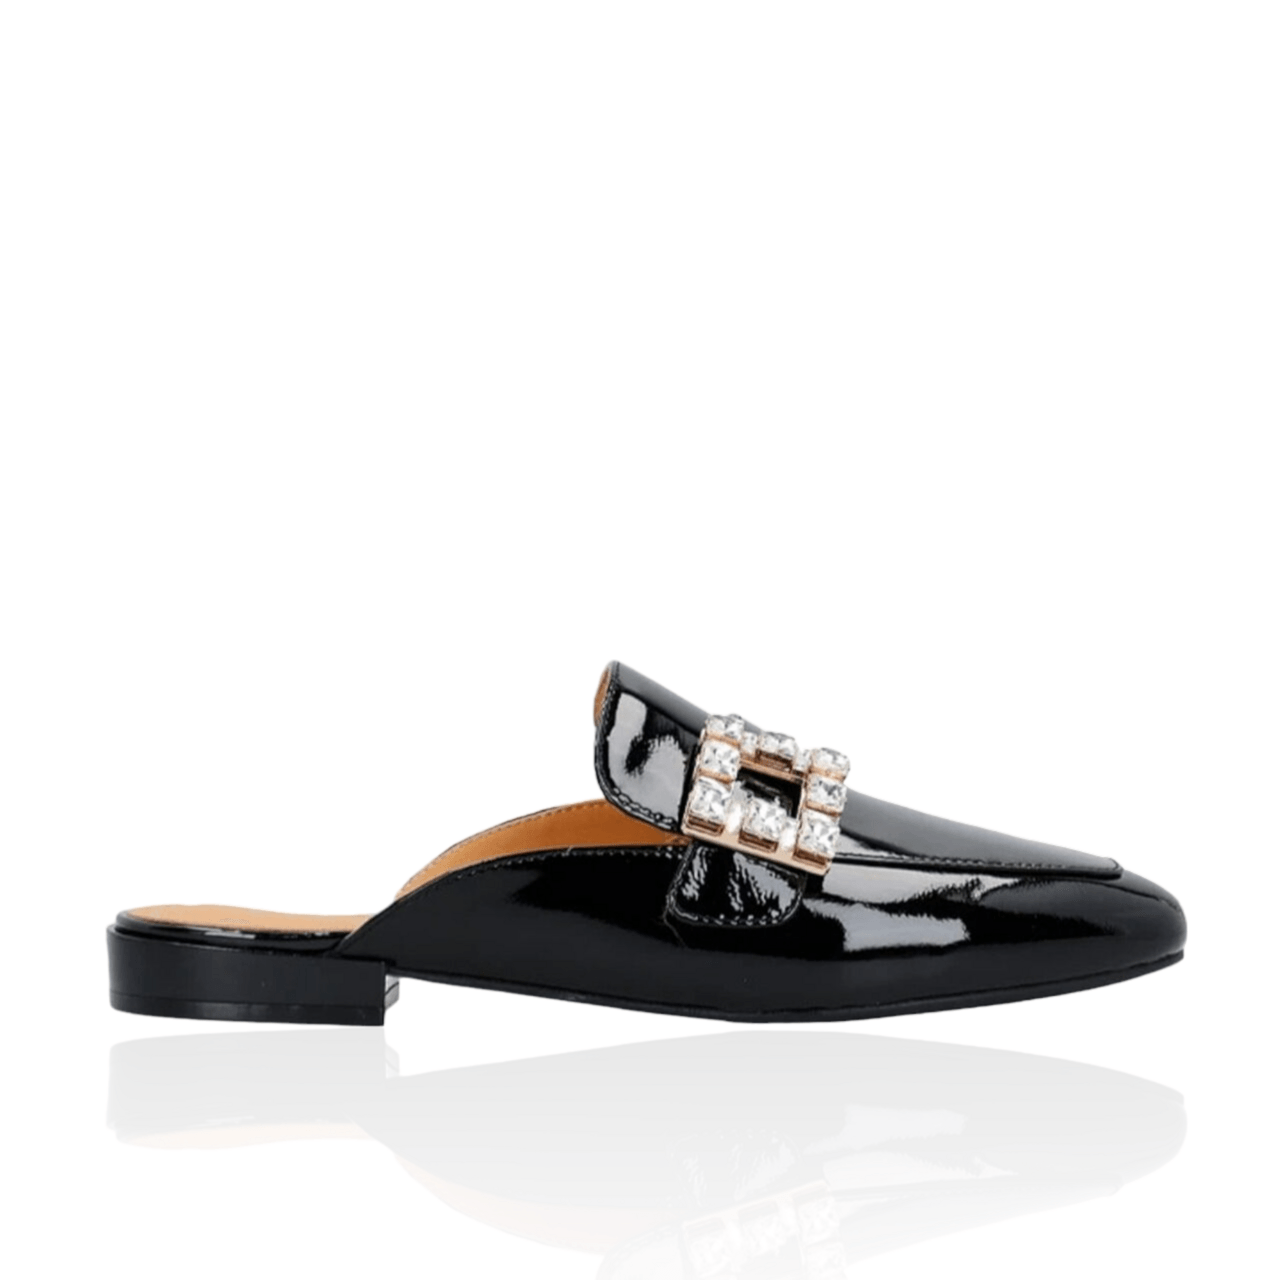 Staccato Black Sandal Mules